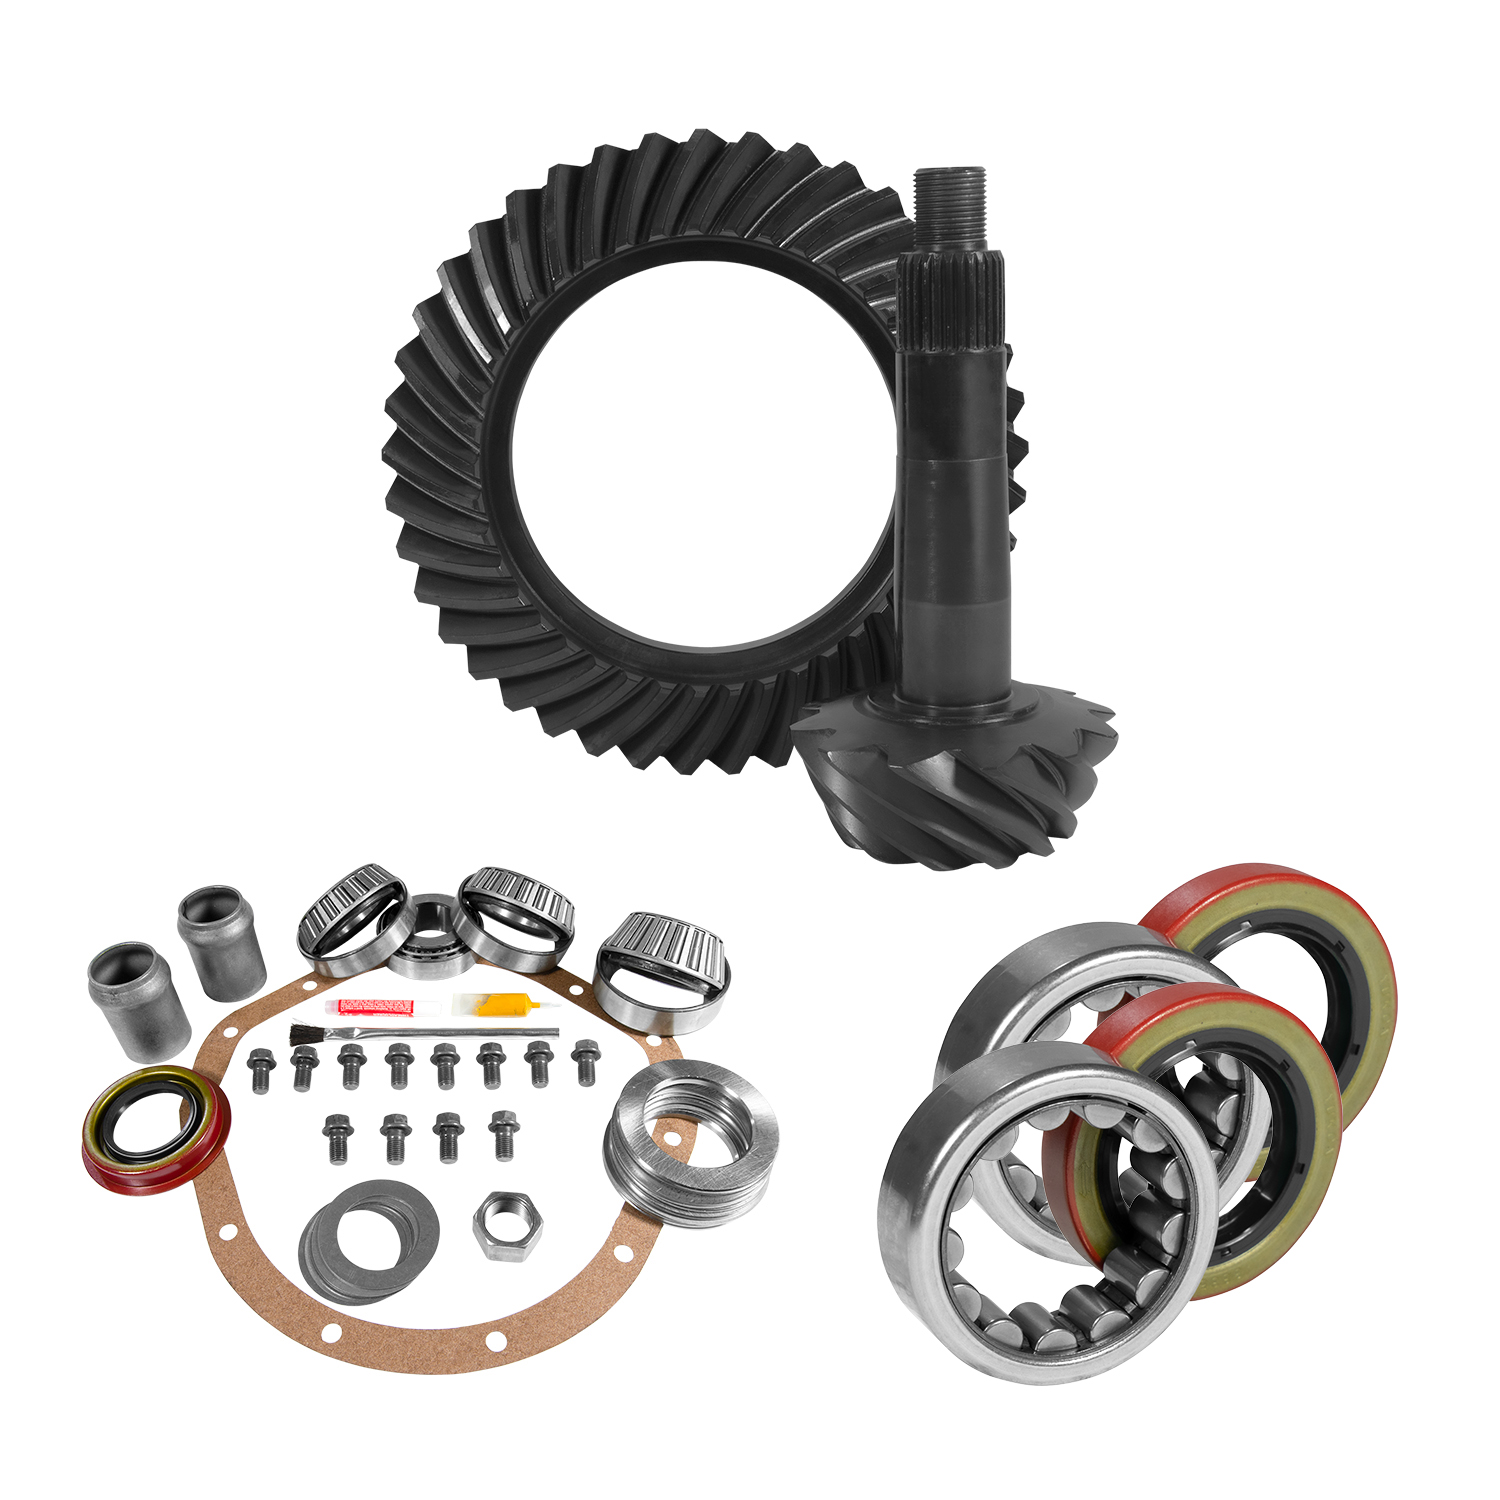 8.875" GM 12T Thick 4.11 Rear Ring & Pinion, Install Kit, Axle Bearings & Seals 